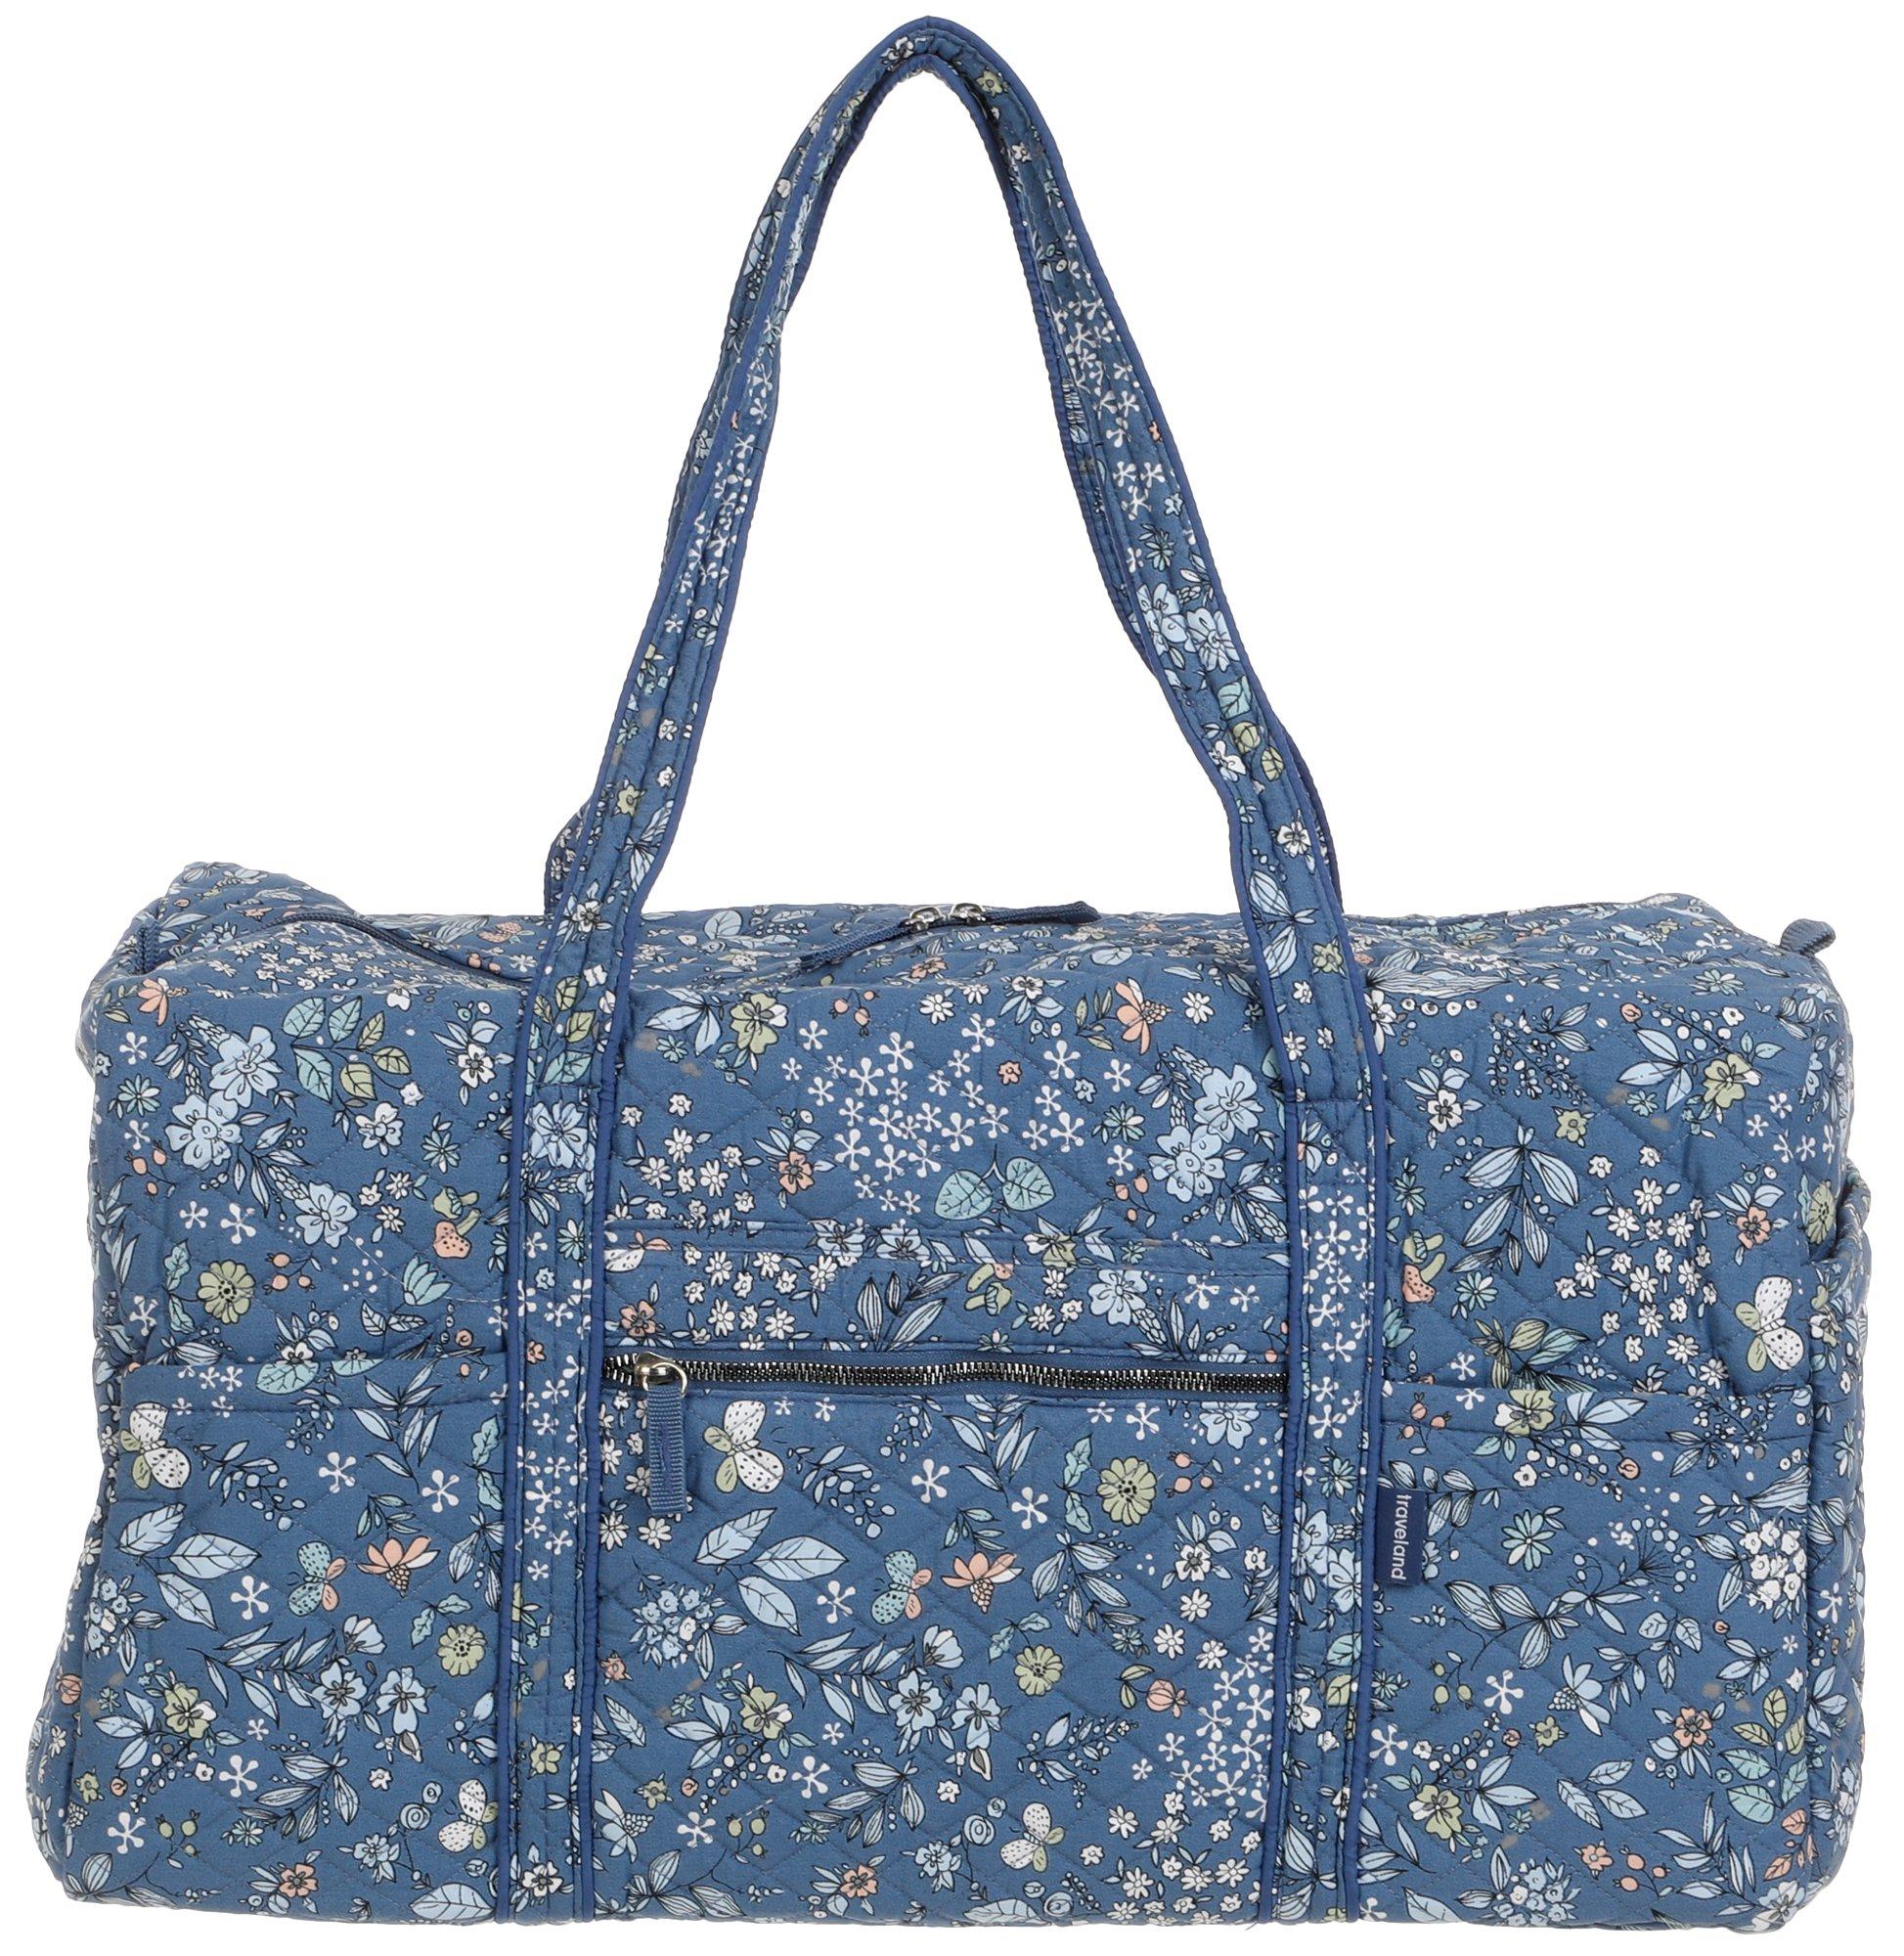 Floral Quilted Travel Duffle Bag